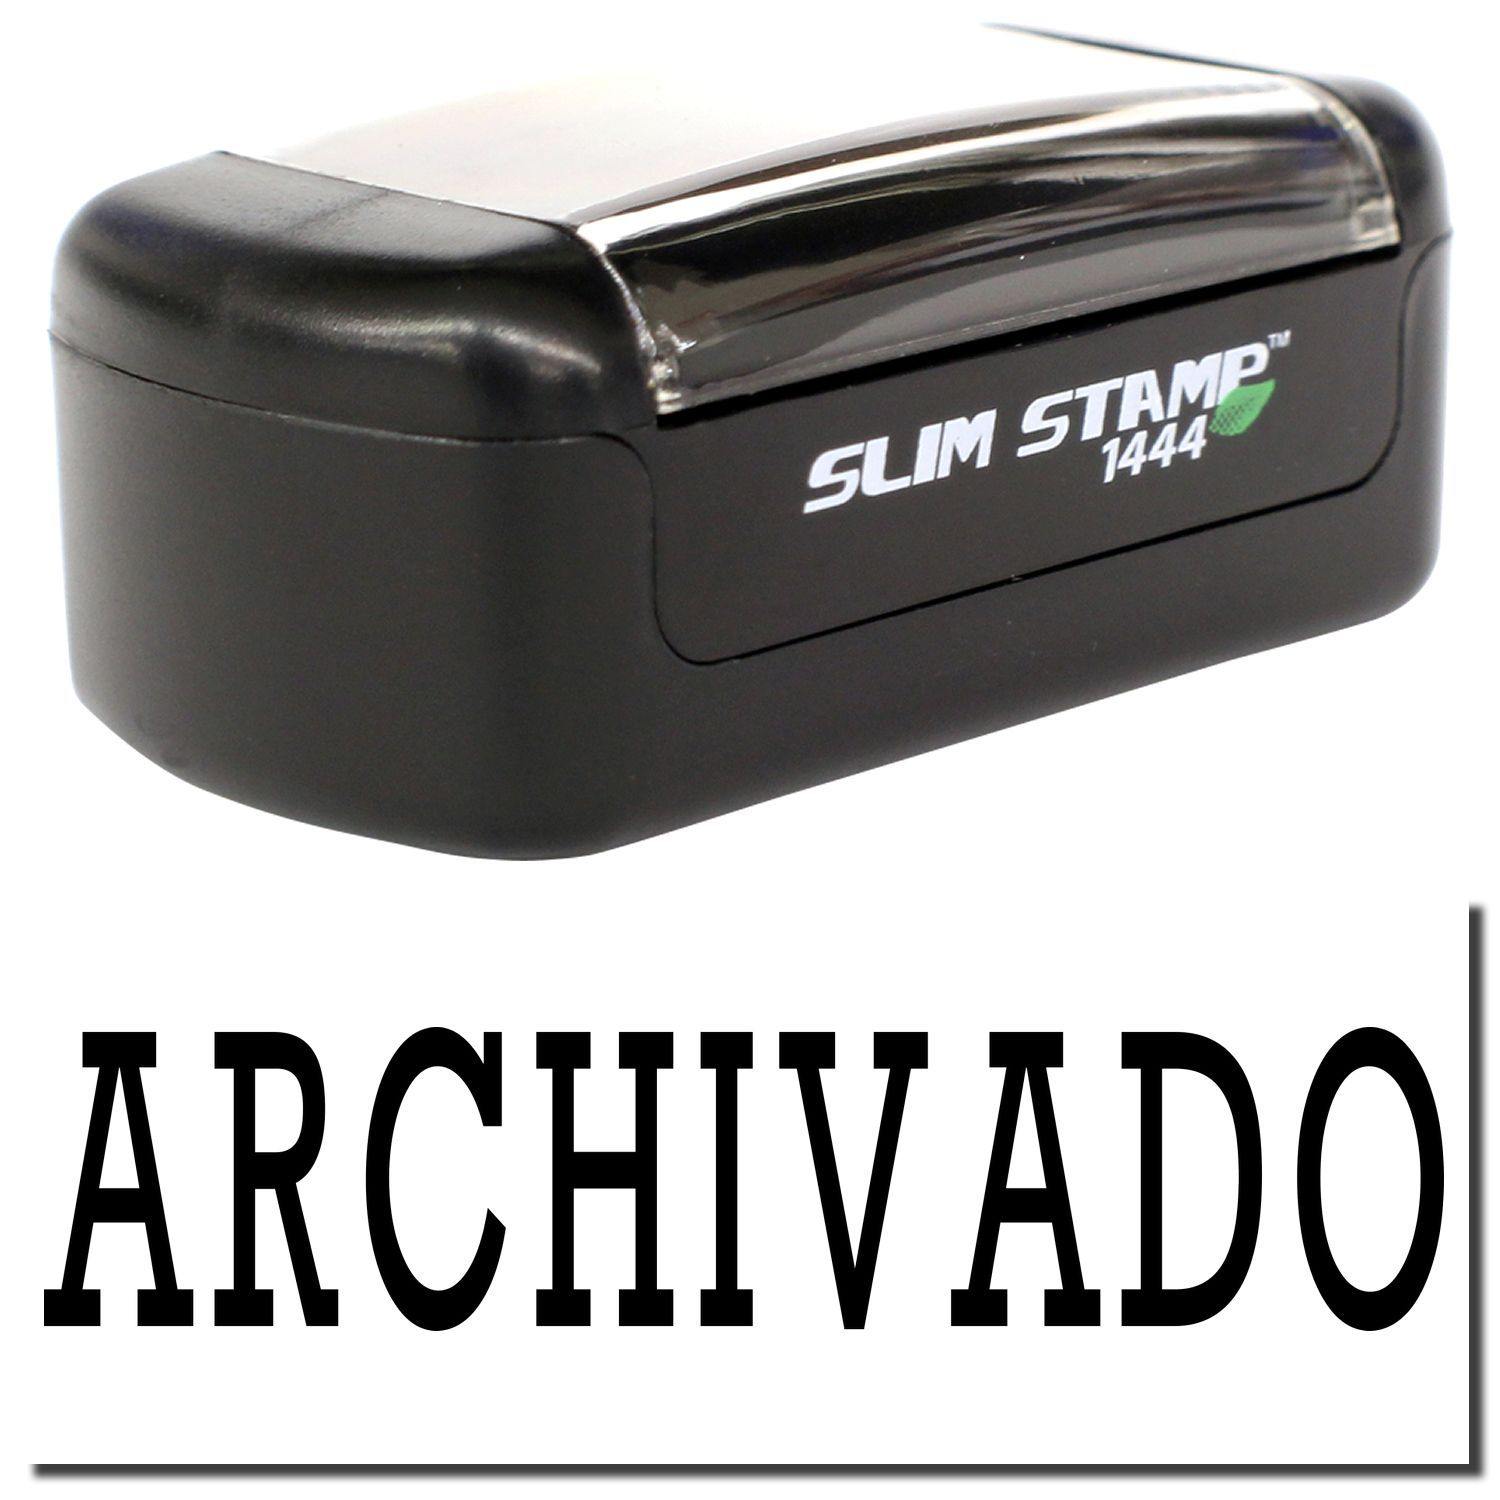 A stock office pre-inked stamp with a stamped image showing how the text "ARCHIVADO" is displayed after stamping.